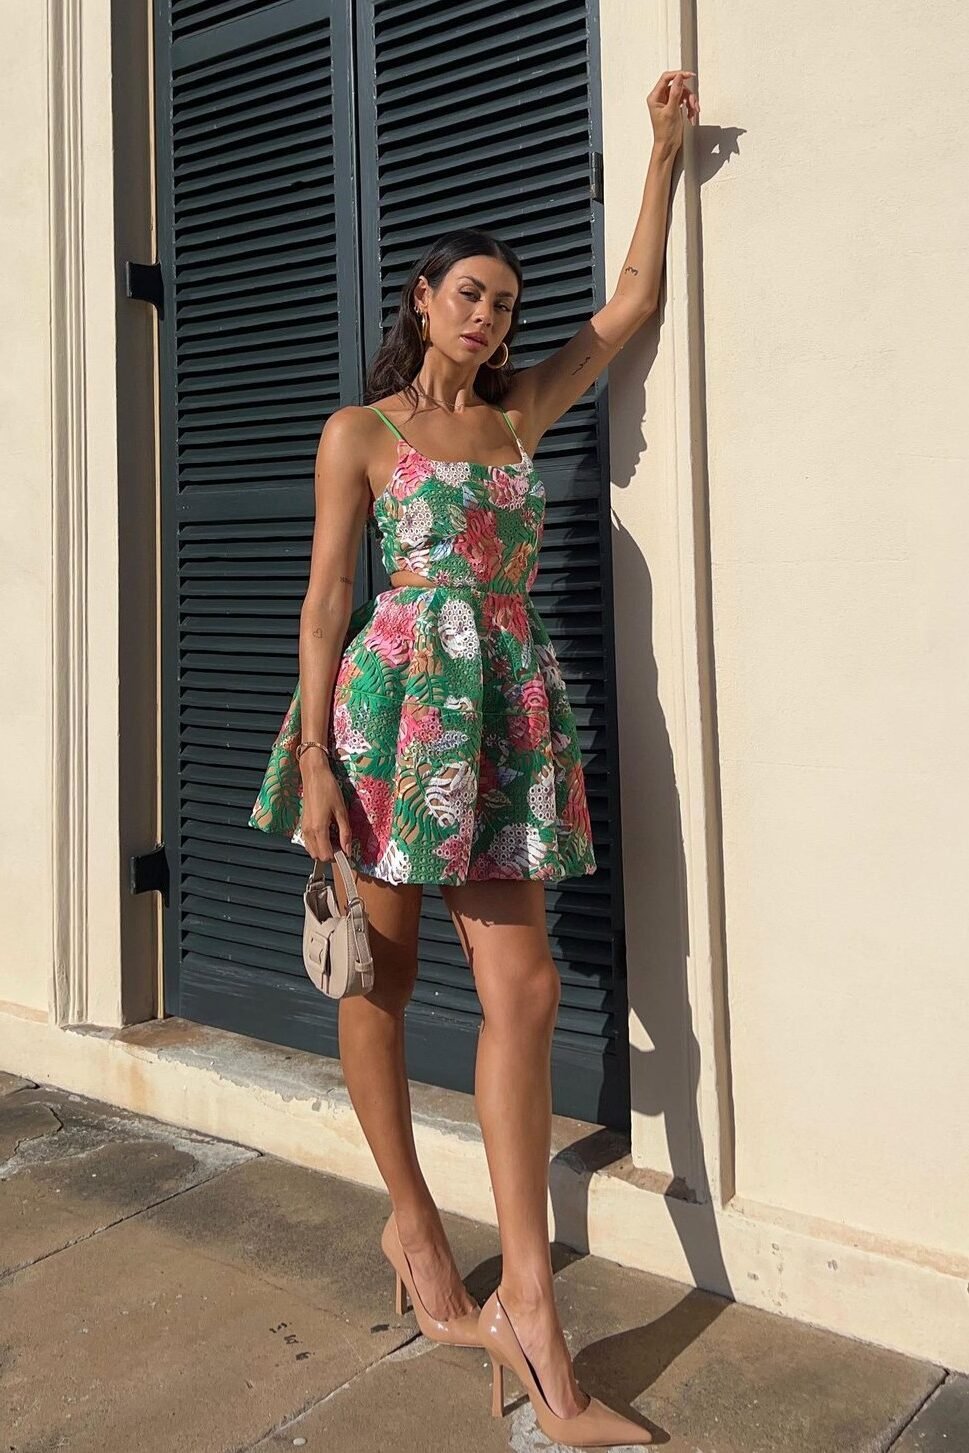 A woman in a {Printed Designer Mini Dress We’re Bookmarking For Spring & Summer} and heels stands by a building with shutters, holding a handbag, with sunlight casting shadows on the wall.